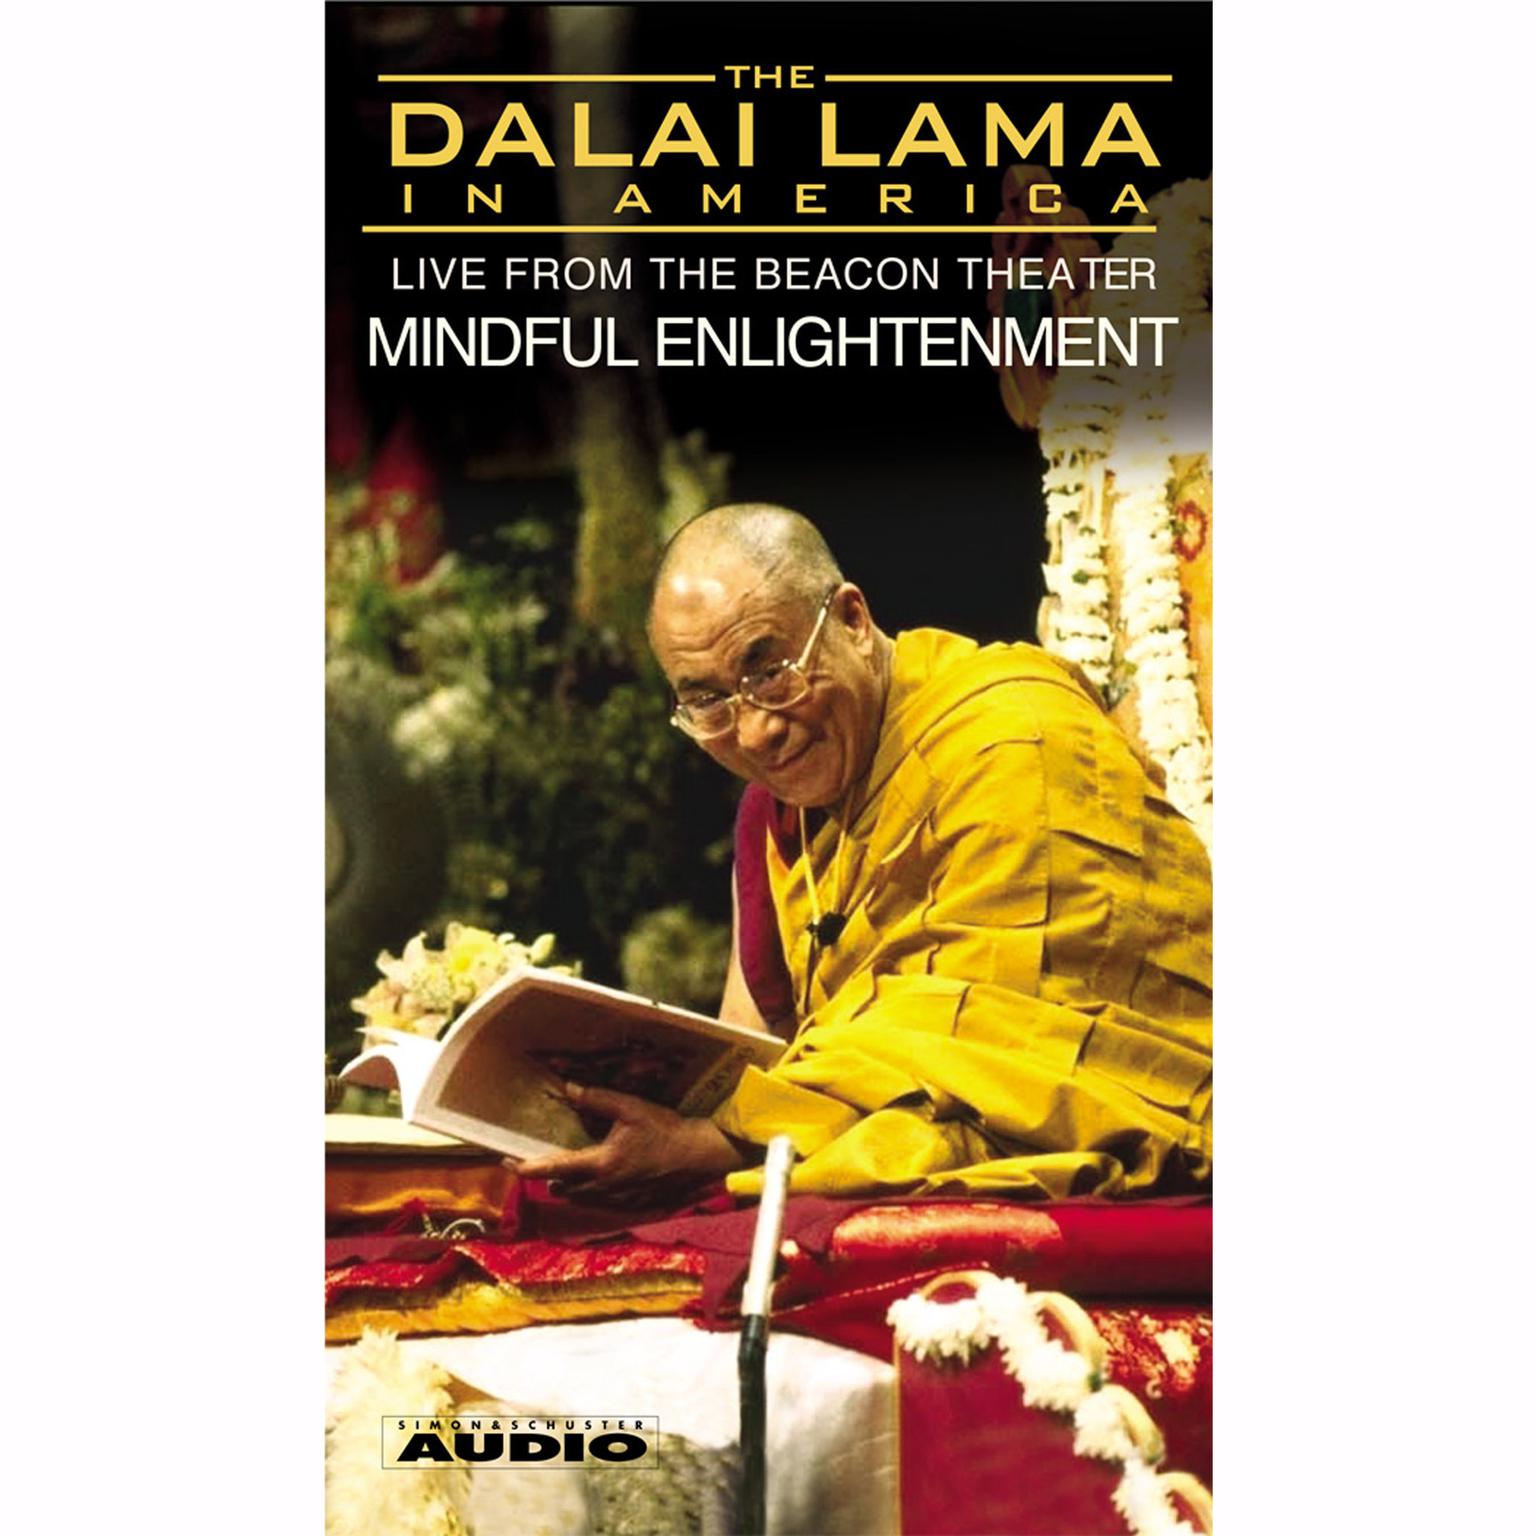 The Dalai Lama in America: Mindful Enlightenment Audiobook, by His Holiness the Dalai Lama